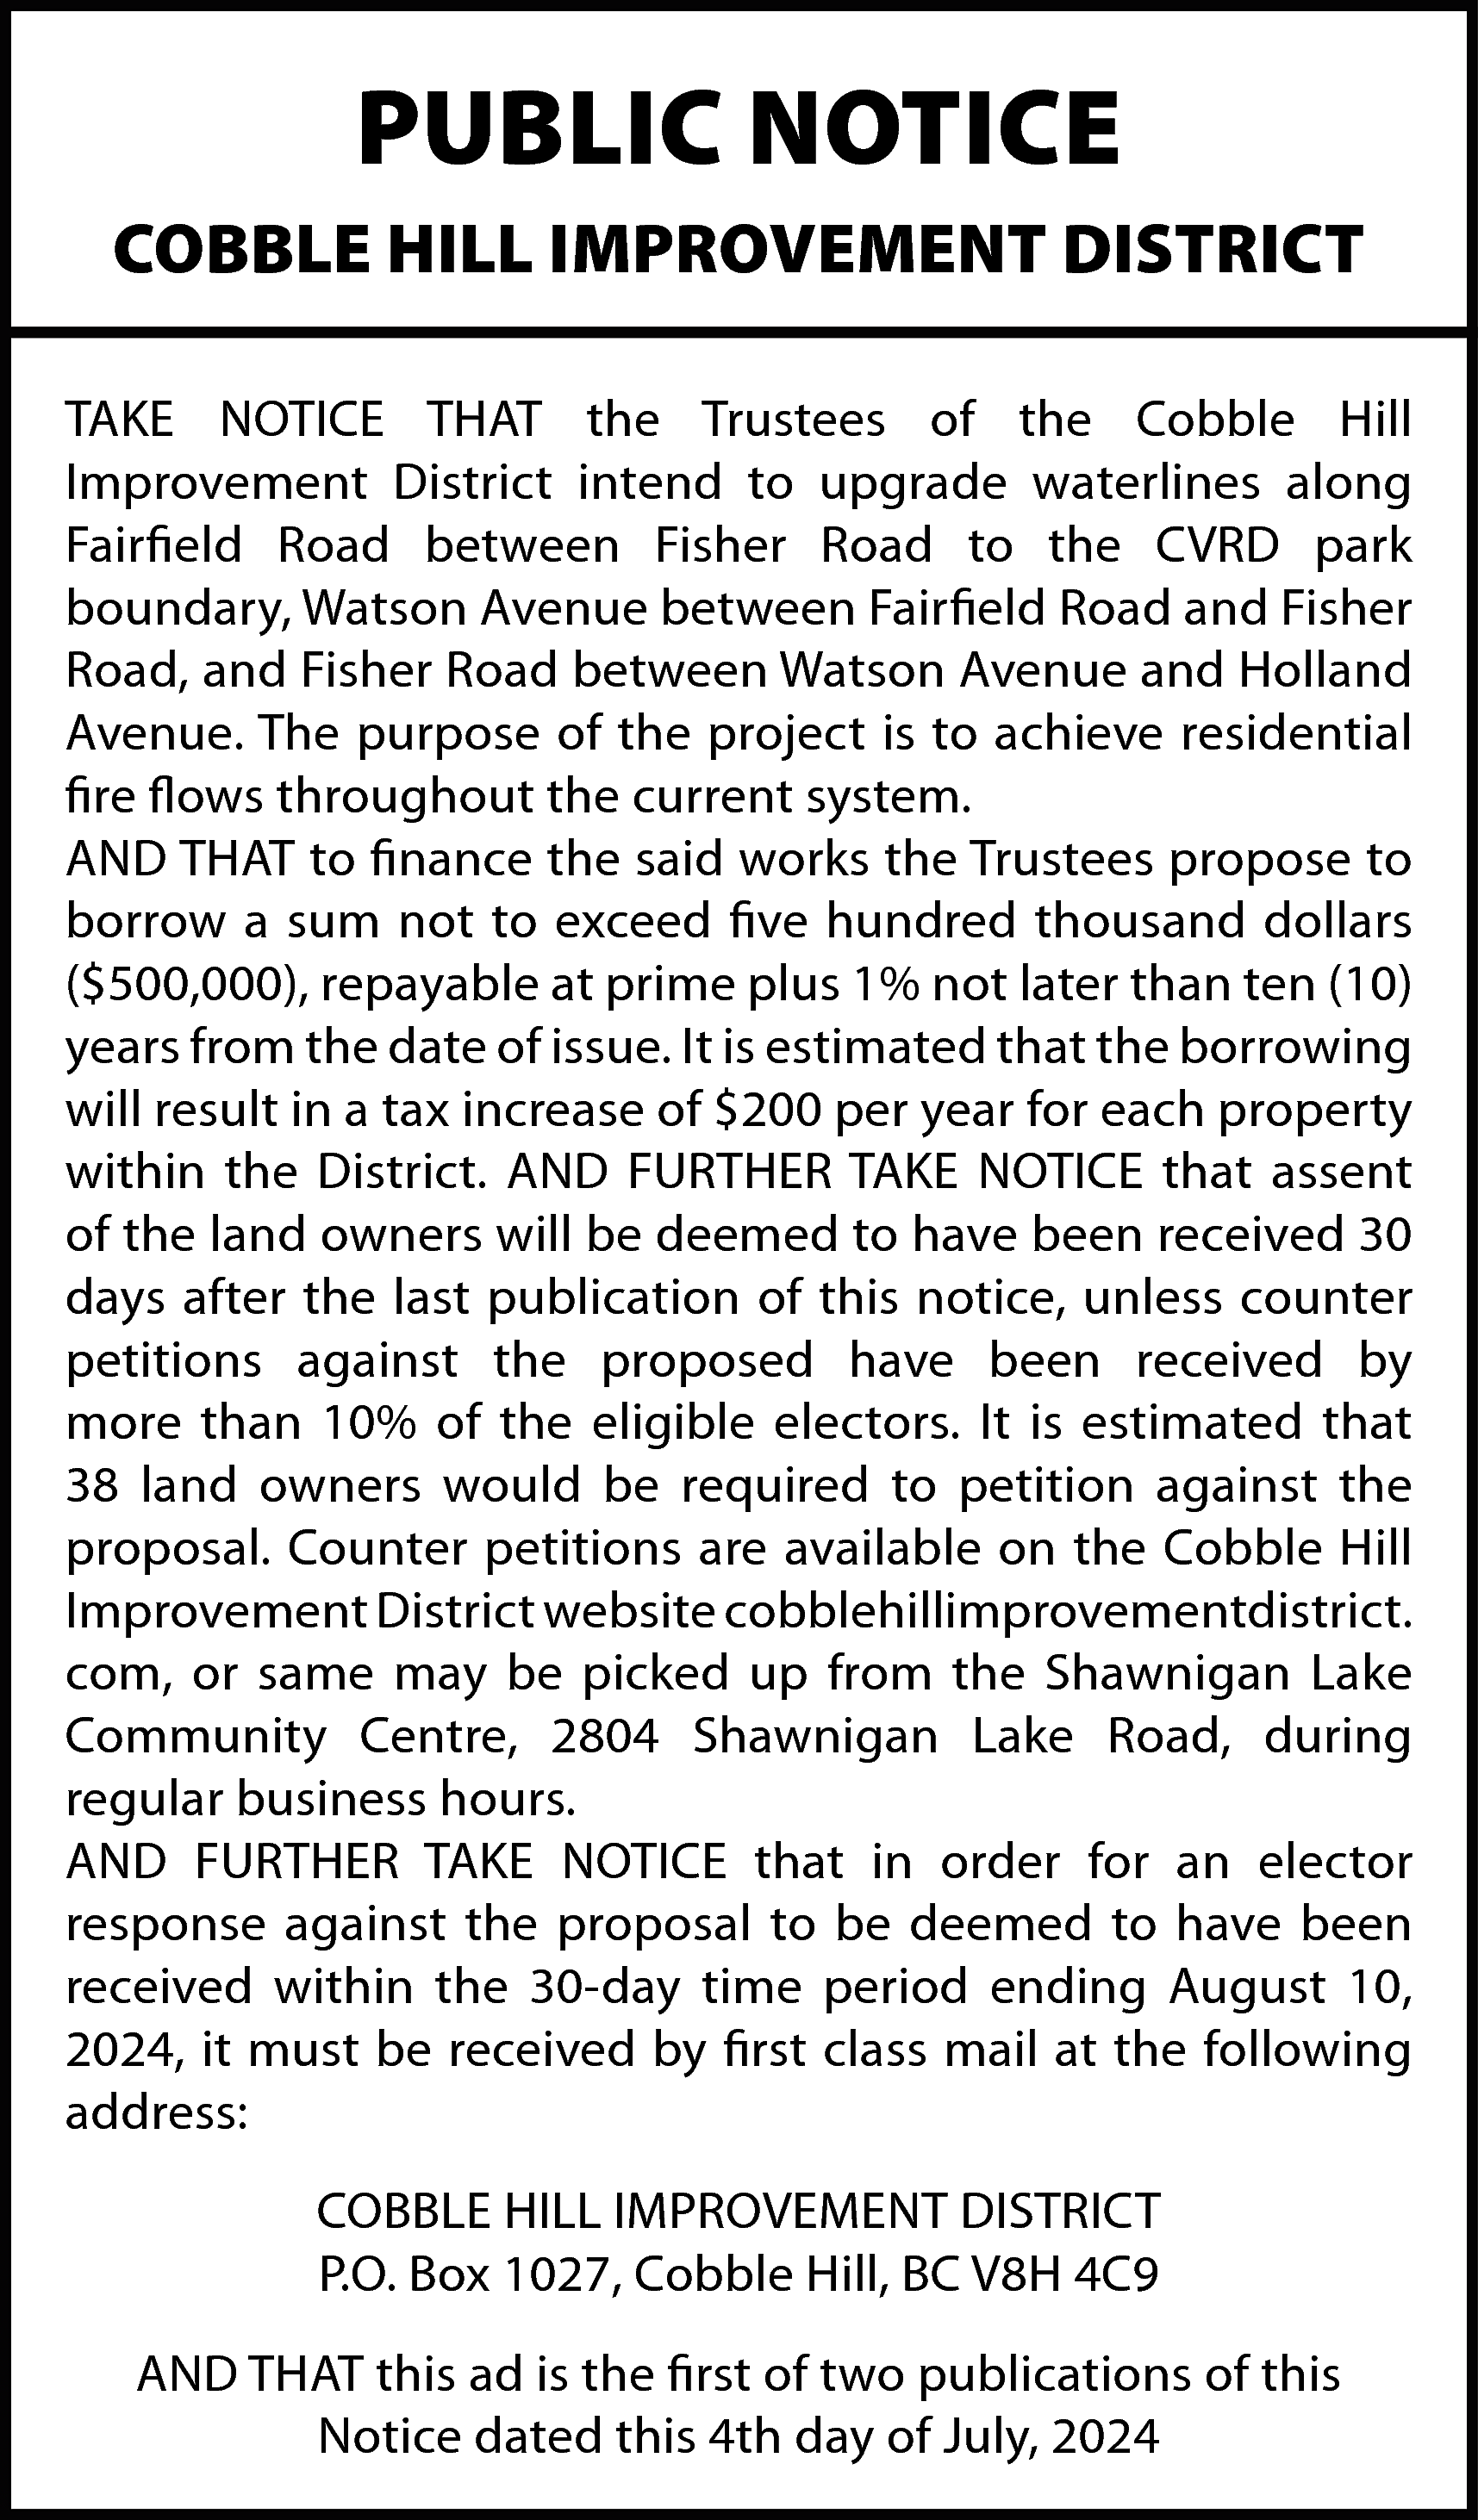 PUBLIC NOTICE <br>COBBLE HILL IMPROVEMENT  PUBLIC NOTICE  COBBLE HILL IMPROVEMENT DISTRICT  TAKE NOTICE THAT the Trustees of the Cobble Hill  Improvement District intend to upgrade waterlines along  Fairfield Road between Fisher Road to the CVRD park  boundary, Watson Avenue between Fairfield Road and Fisher  Road, and Fisher Road between Watson Avenue and Holland  Avenue. The purpose of the project is to achieve residential  fire flows throughout the current system.  AND THAT to finance the said works the Trustees propose to  borrow a sum not to exceed five hundred thousand dollars  ($500,000), repayable at prime plus 1% not later than ten (10)  years from the date of issue. It is estimated that the borrowing  will result in a tax increase of $200 per year for each property  within the District. AND FURTHER TAKE NOTICE that assent  of the land owners will be deemed to have been received 30  days after the last publication of this notice, unless counter  petitions against the proposed have been received by  more than 10% of the eligible electors. It is estimated that  38 land owners would be required to petition against the  proposal. Counter petitions are available on the Cobble Hill  Improvement District website cobblehillimprovementdistrict.  com, or same may be picked up from the Shawnigan Lake  Community Centre, 2804 Shawnigan Lake Road, during  regular business hours.  AND FURTHER TAKE NOTICE that in order for an elector  response against the proposal to be deemed to have been  received within the 30-day time period ending August 10,  2024, it must be received by first class mail at the following  address:  COBBLE HILL IMPROVEMENT DISTRICT  P.O. Box 1027, Cobble Hill, BC V8H 4C9  AND THAT this ad is the first of two publications of this  Notice dated this 4th day of July, 2024    